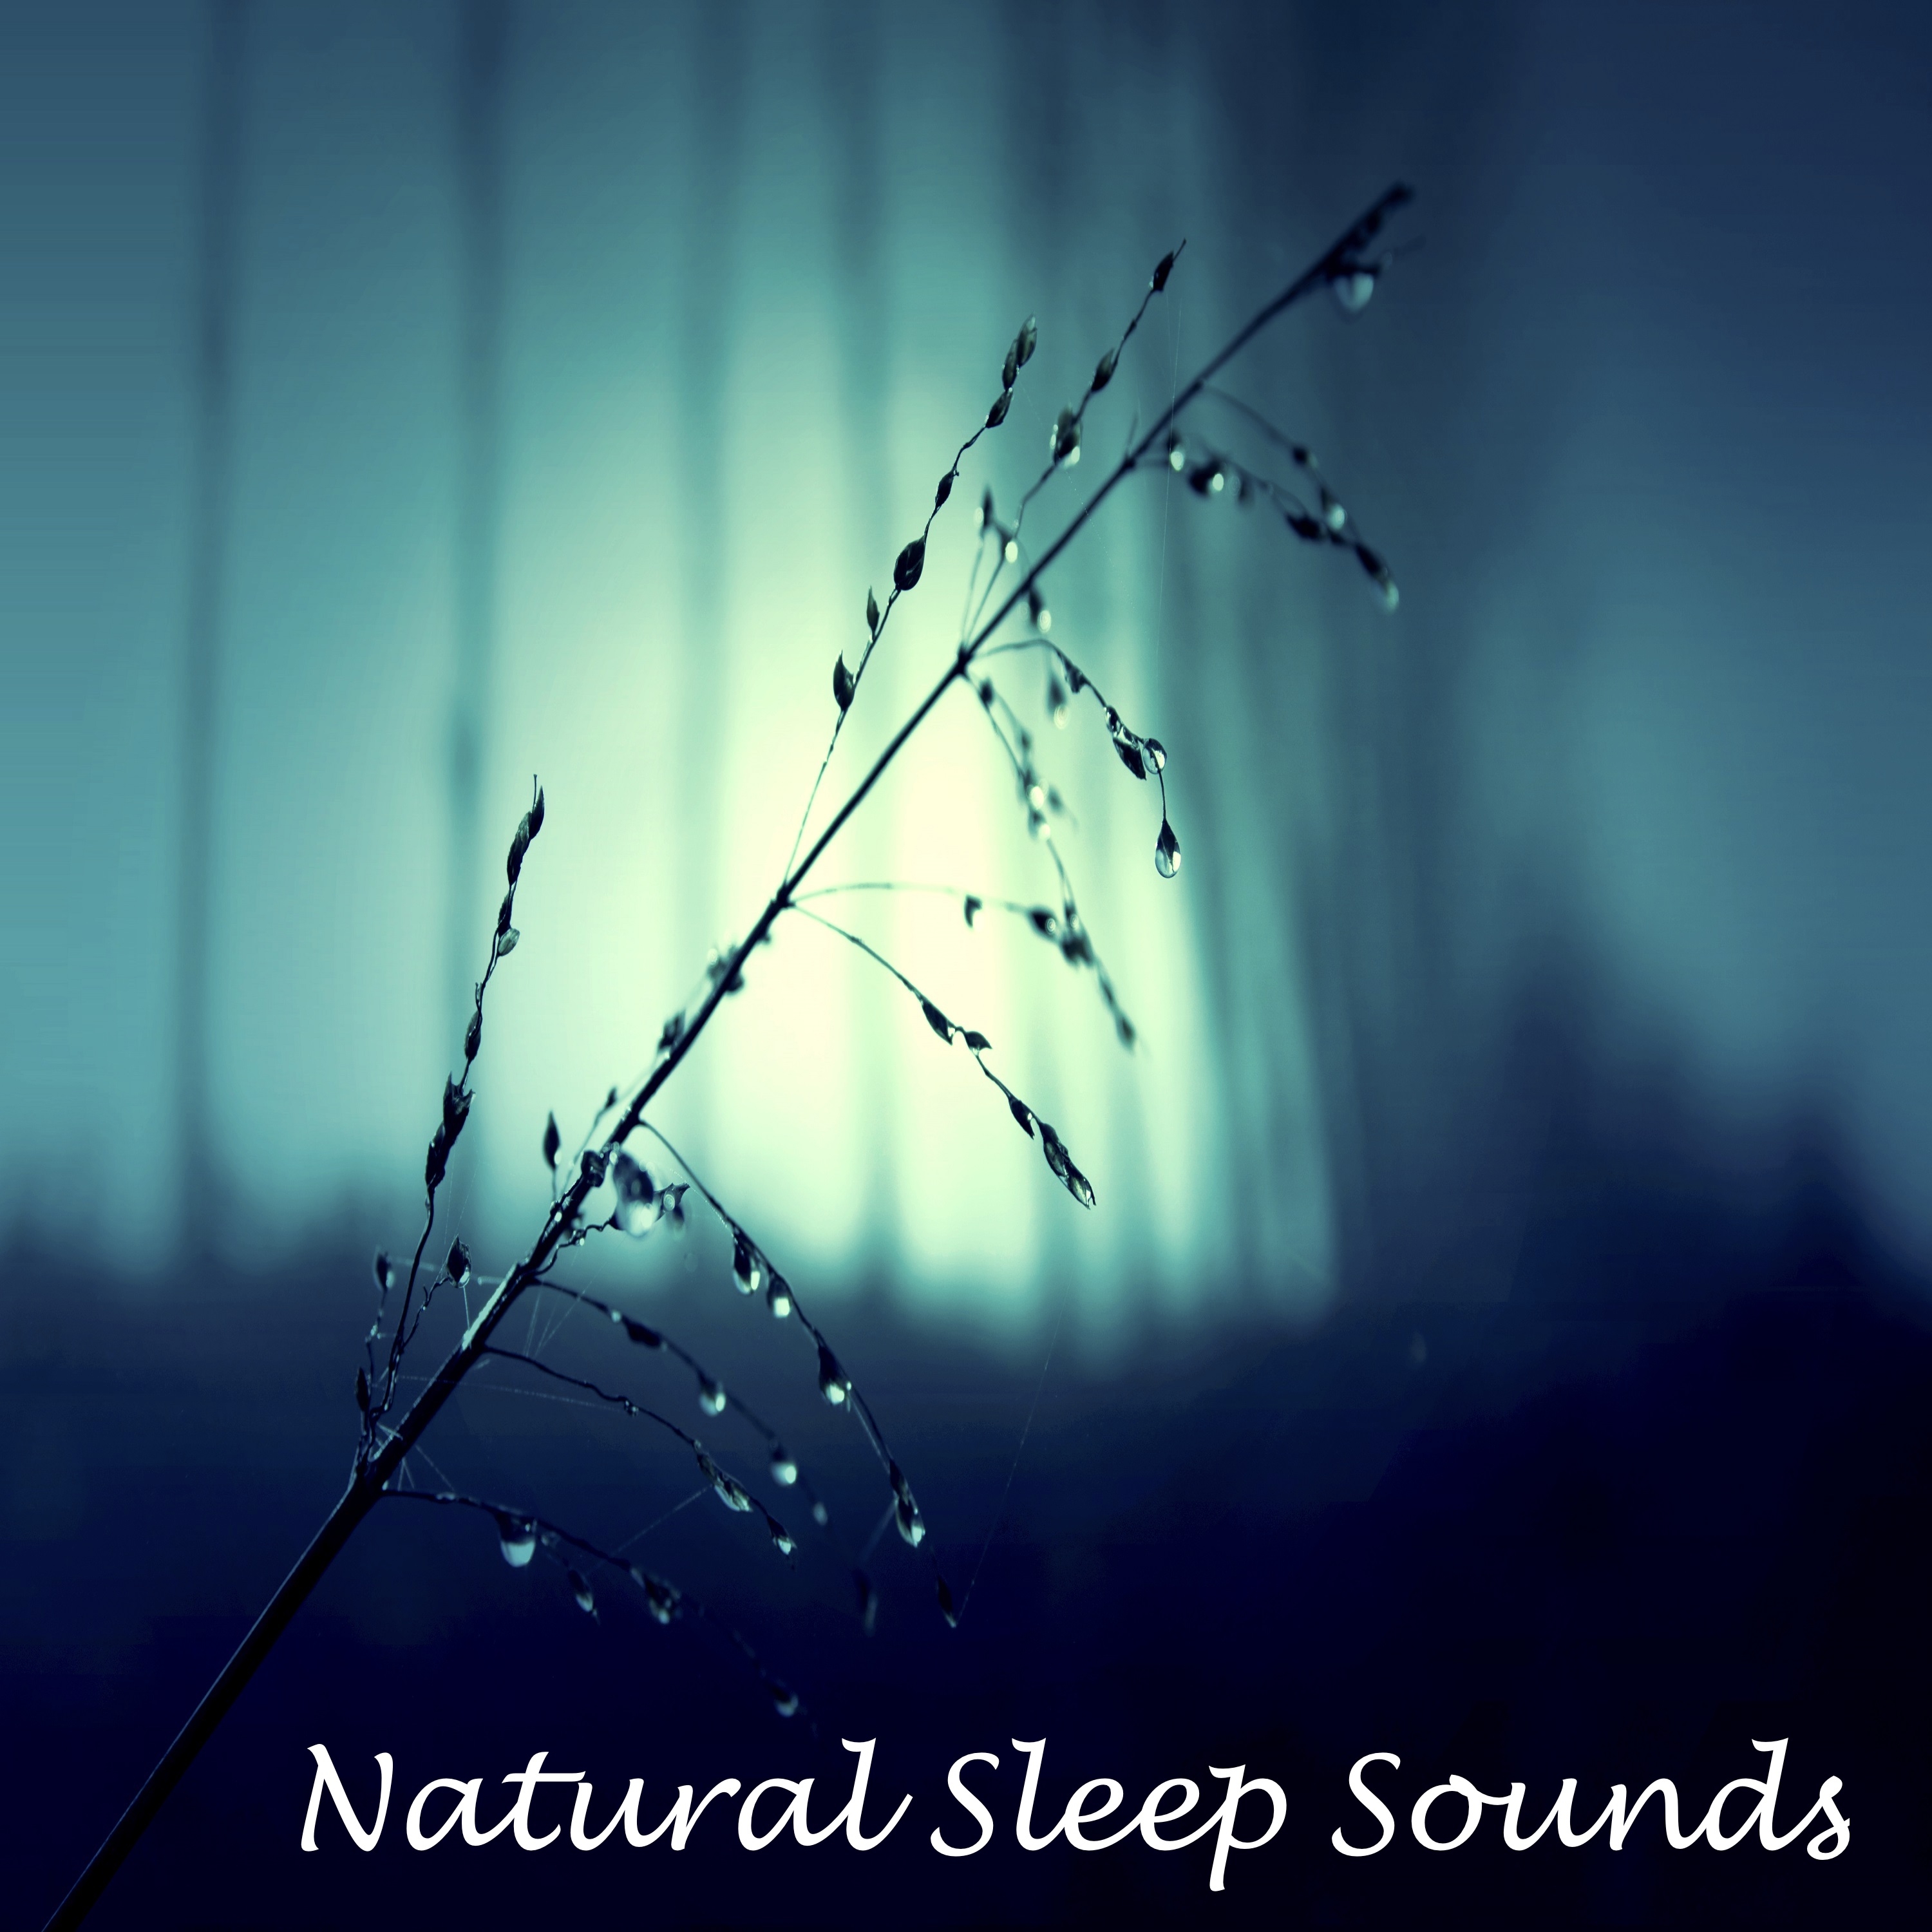 5 Loopable Rain Sounds for Meditation, Relaxation, Sleep and Wellbeing